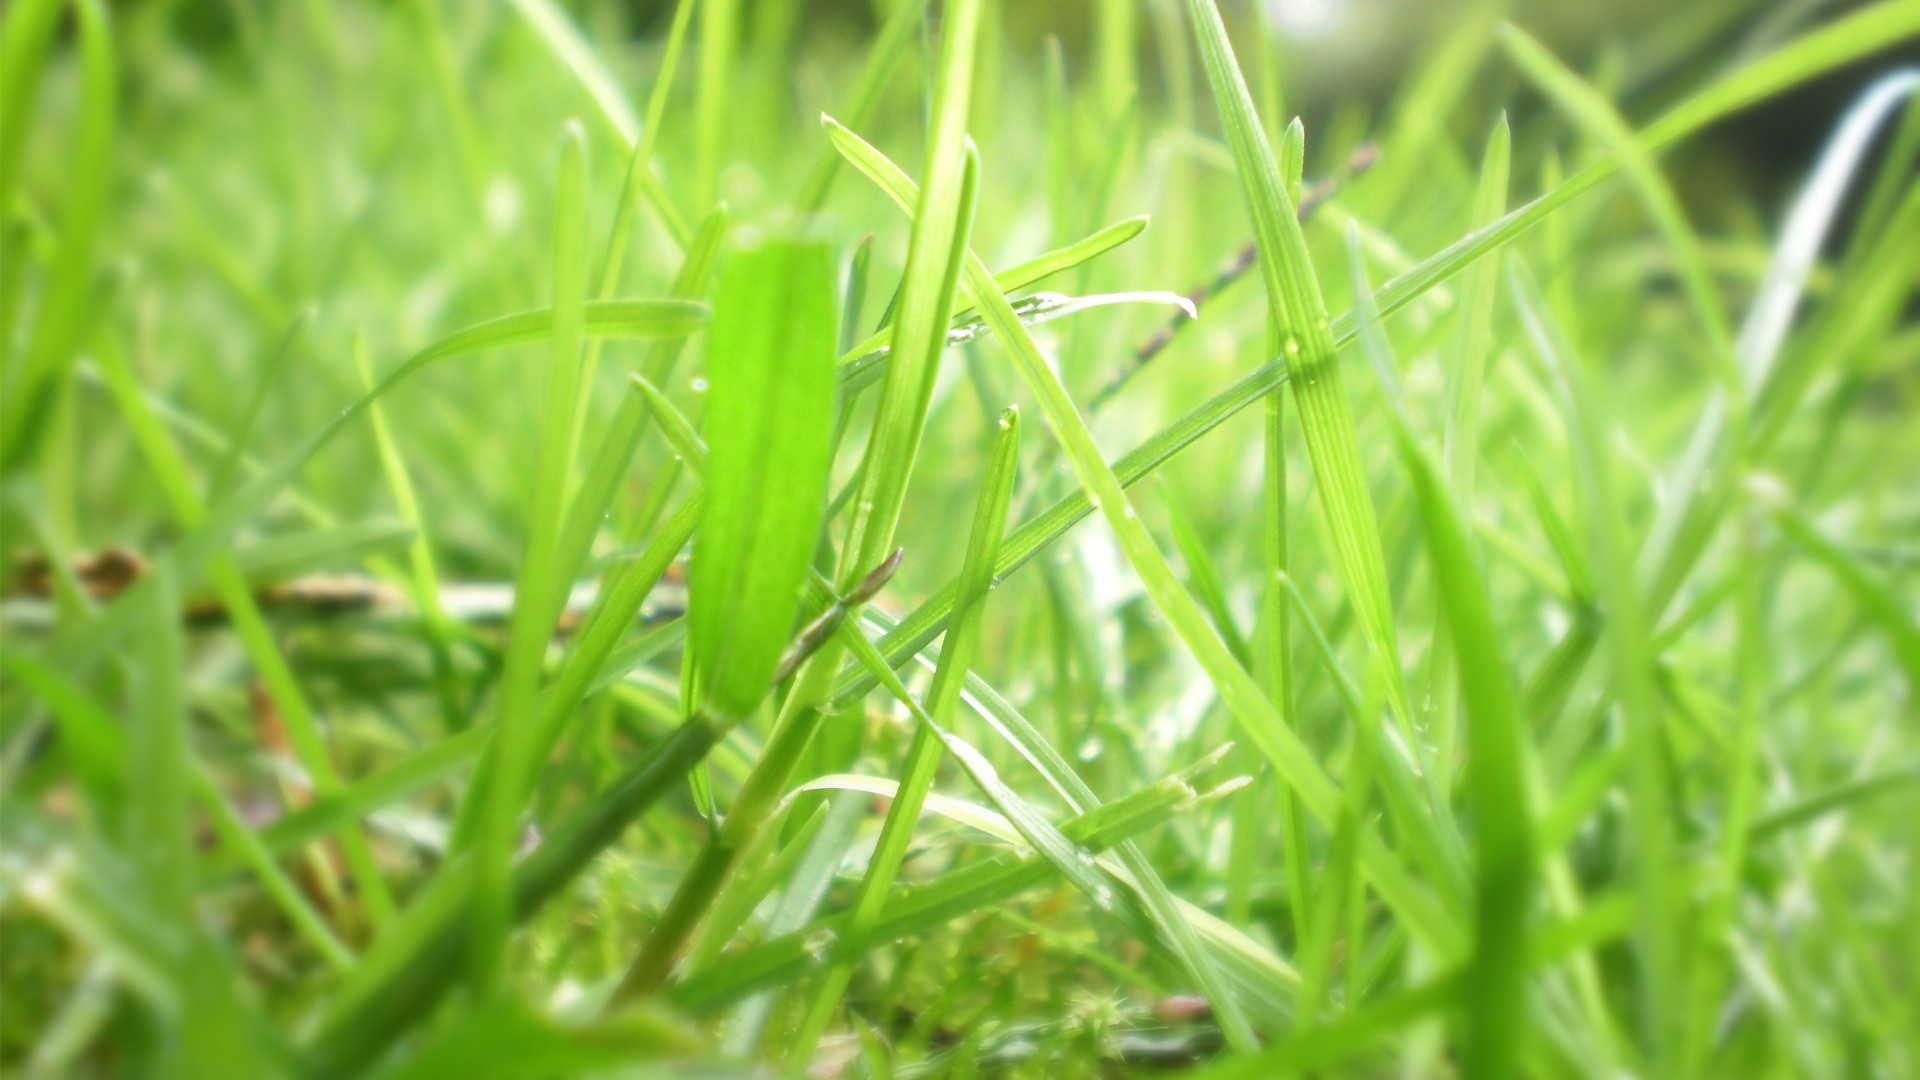 General 1920x1080 grass plants outdoors nature